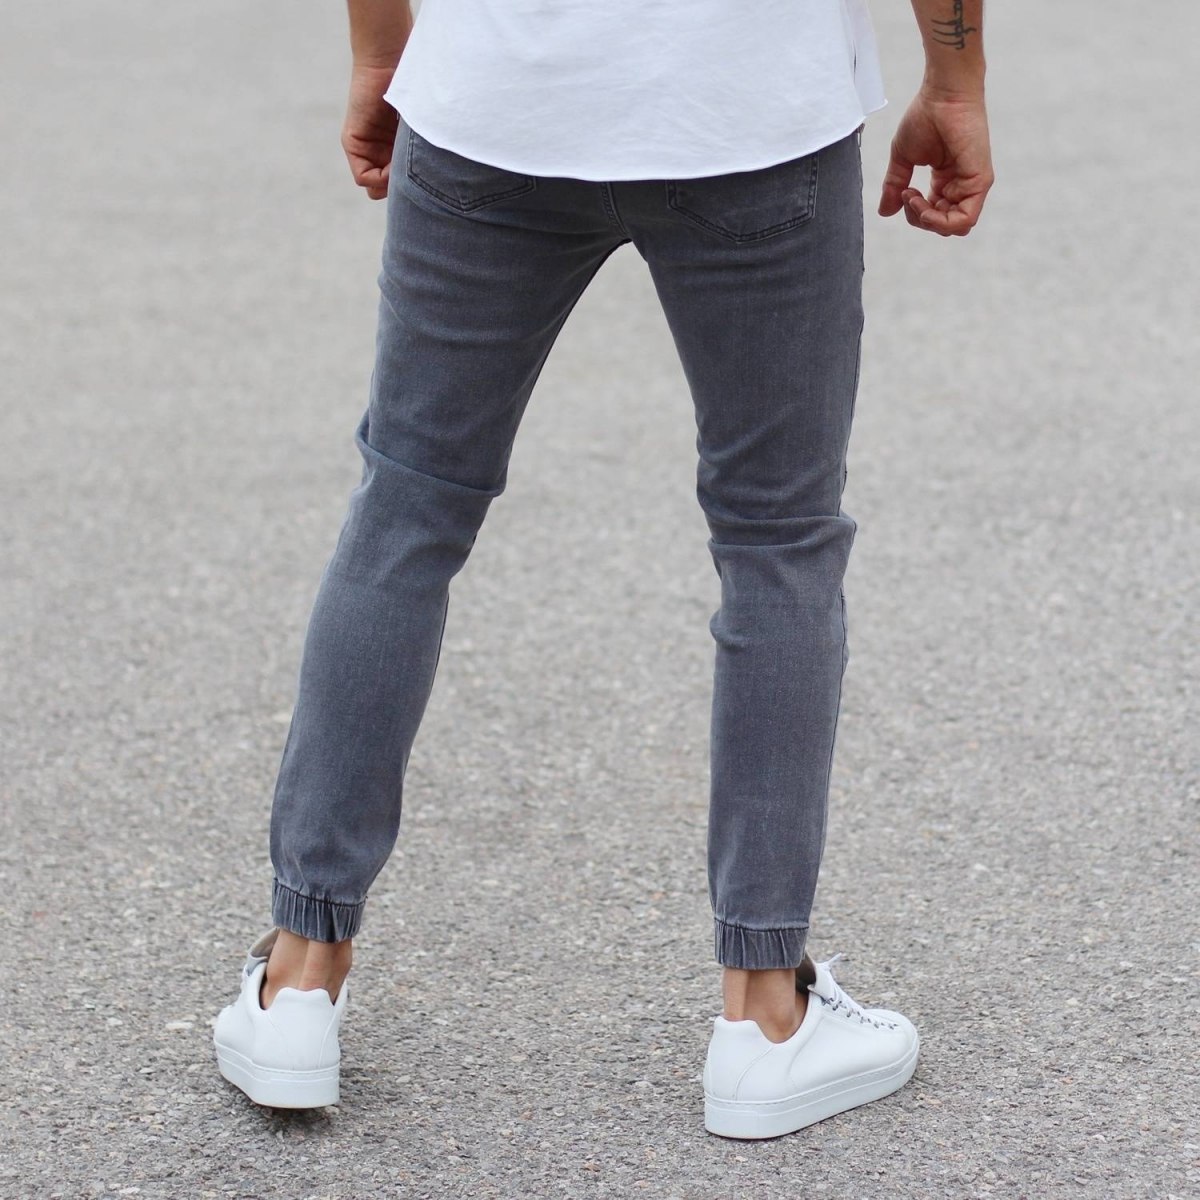 Grey Jeans With Zipper-Pockets and Tapered Ankles